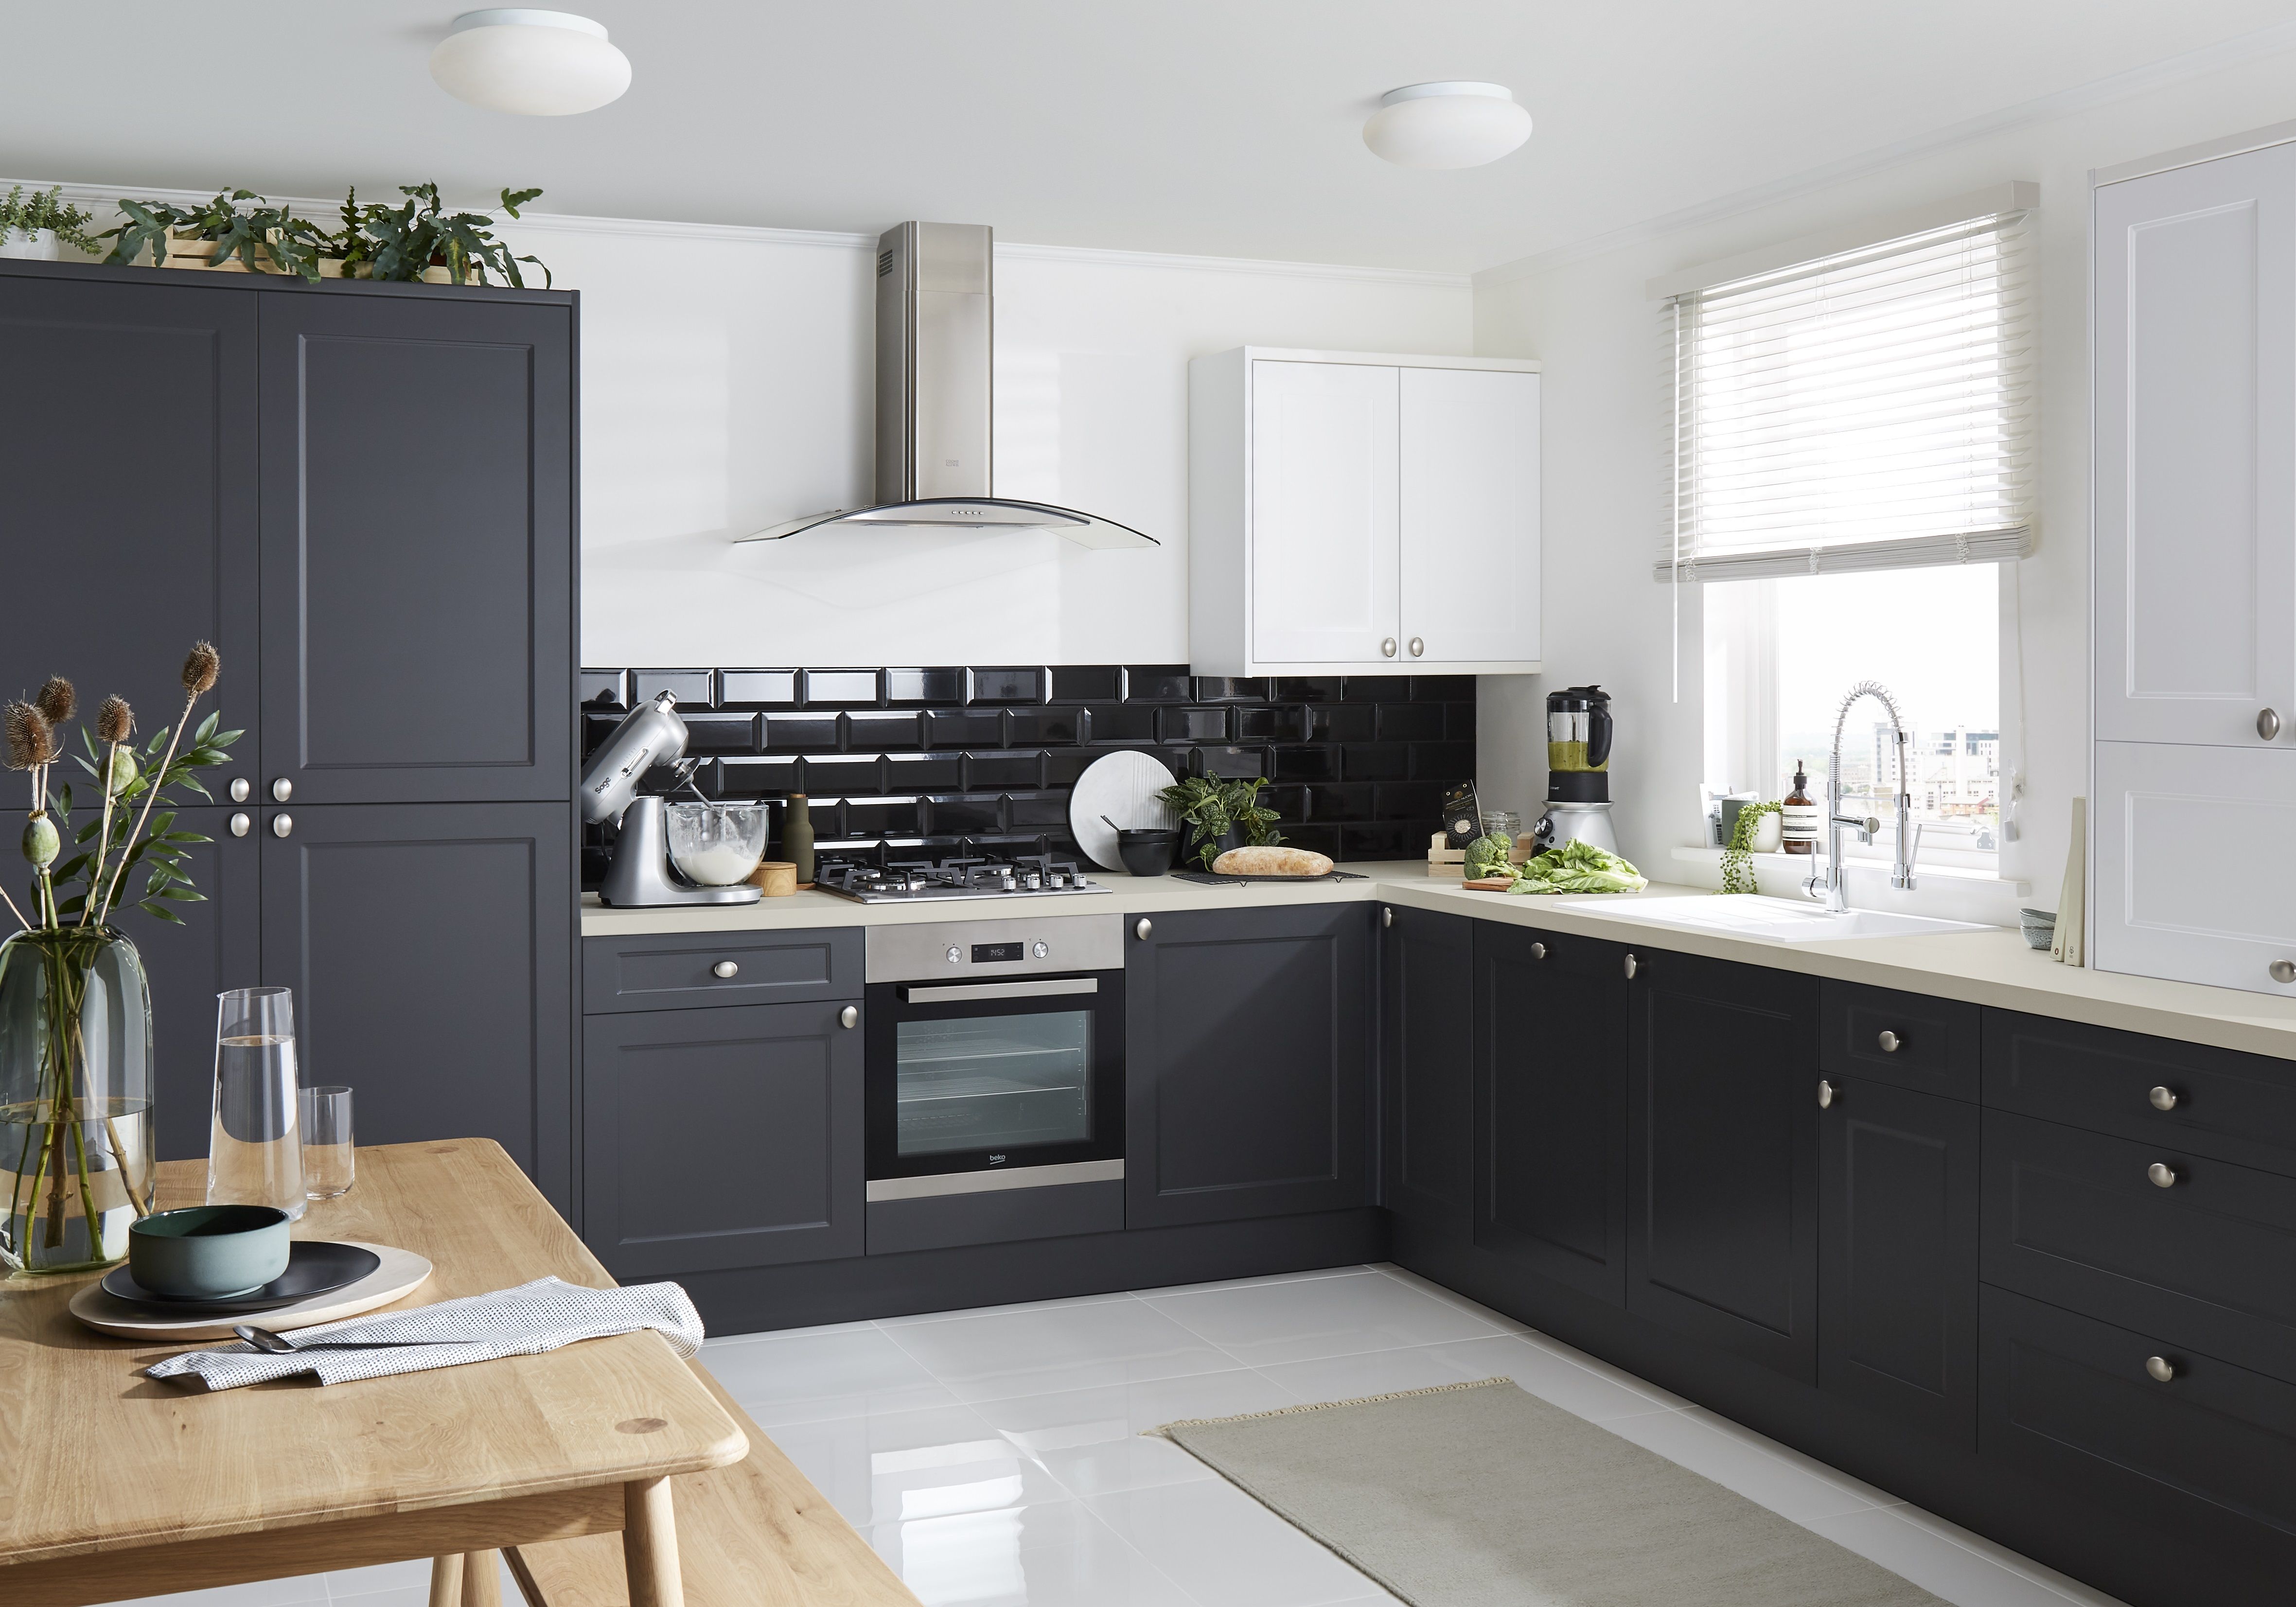 New B&Q Kitchen Range Launches For First Time In 18 Years